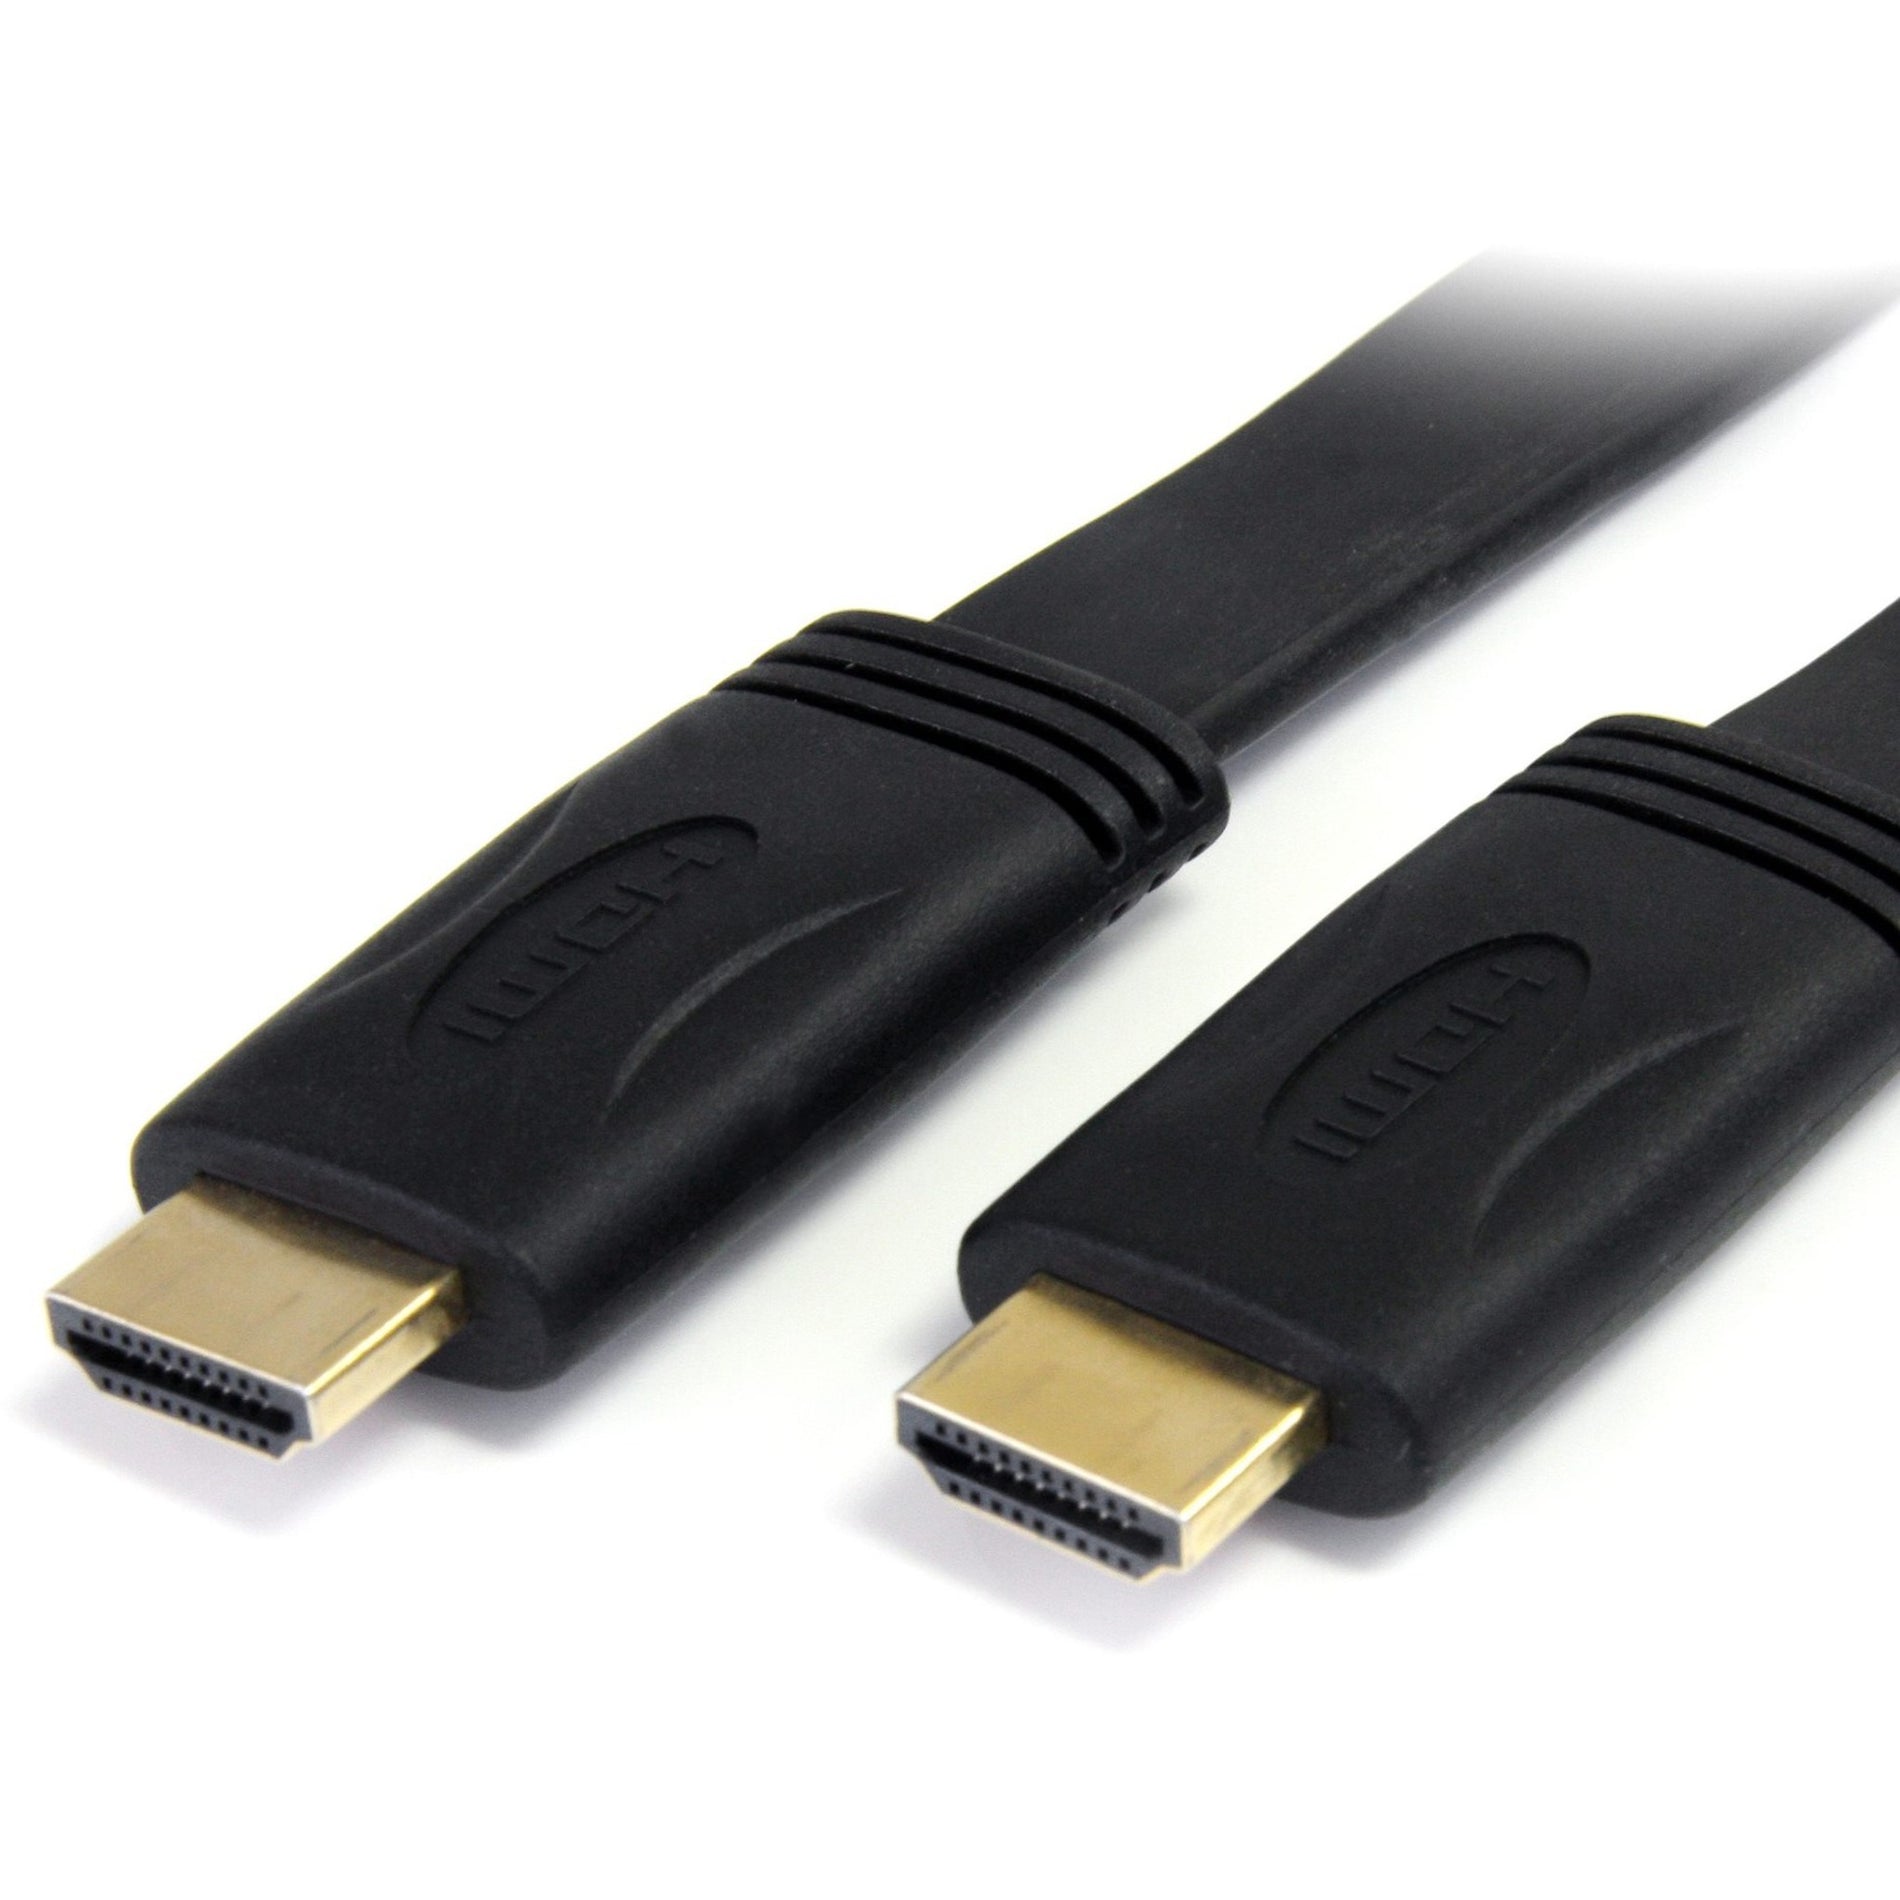 StarTech.com HDMIMM25FL 25 ft High Speed Flat HDMI 1.4 Digital Video Cable with Ethernet, Shielded, Gold Plated Connectors, Black